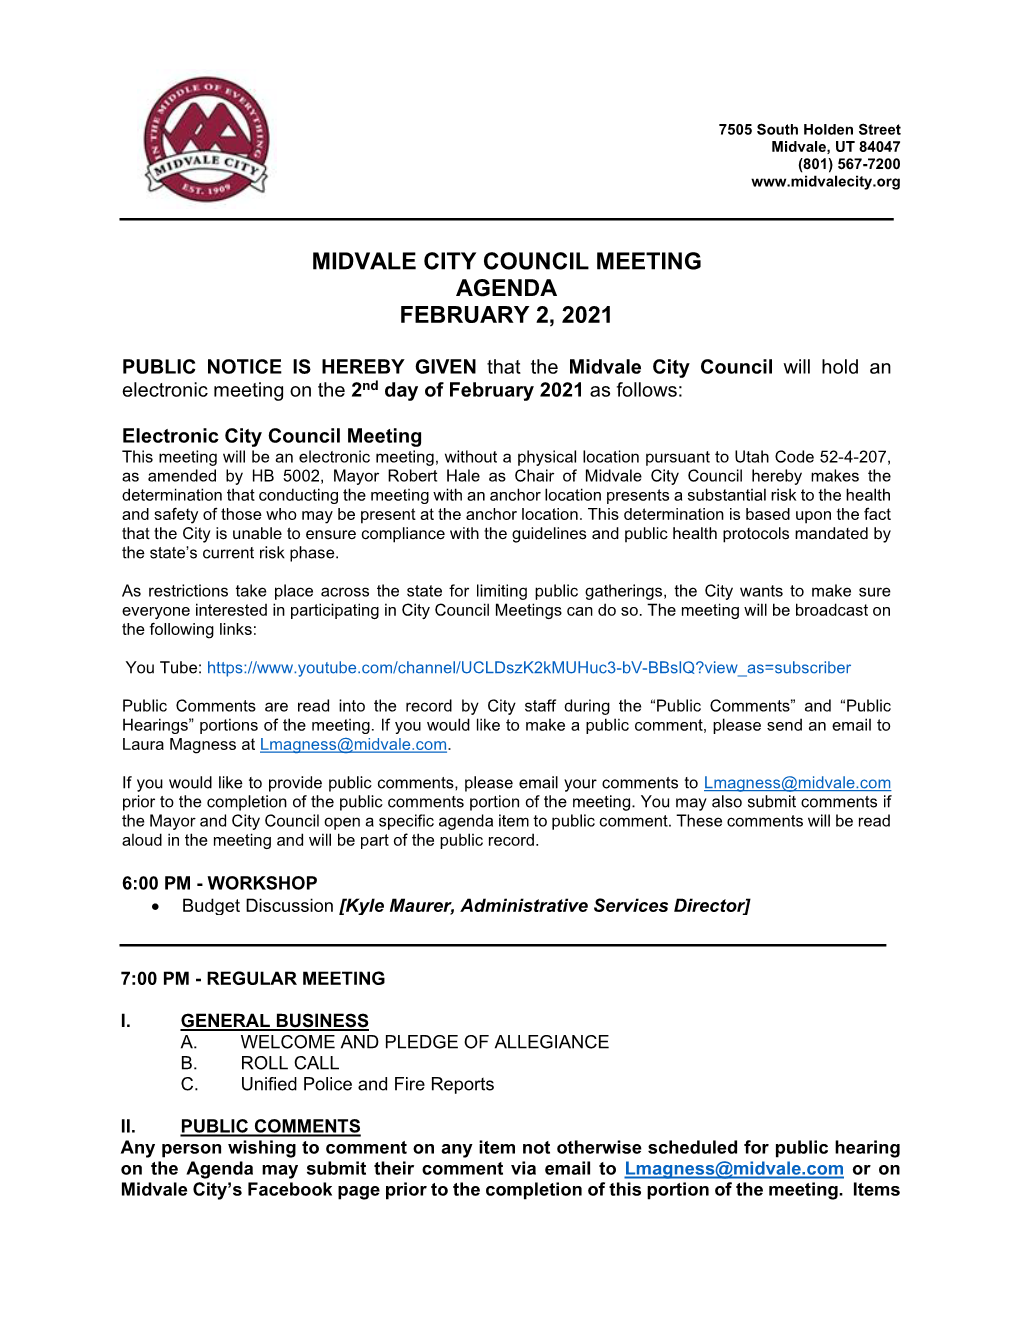 Midvale City Council Meeting Agenda February 2, 2021